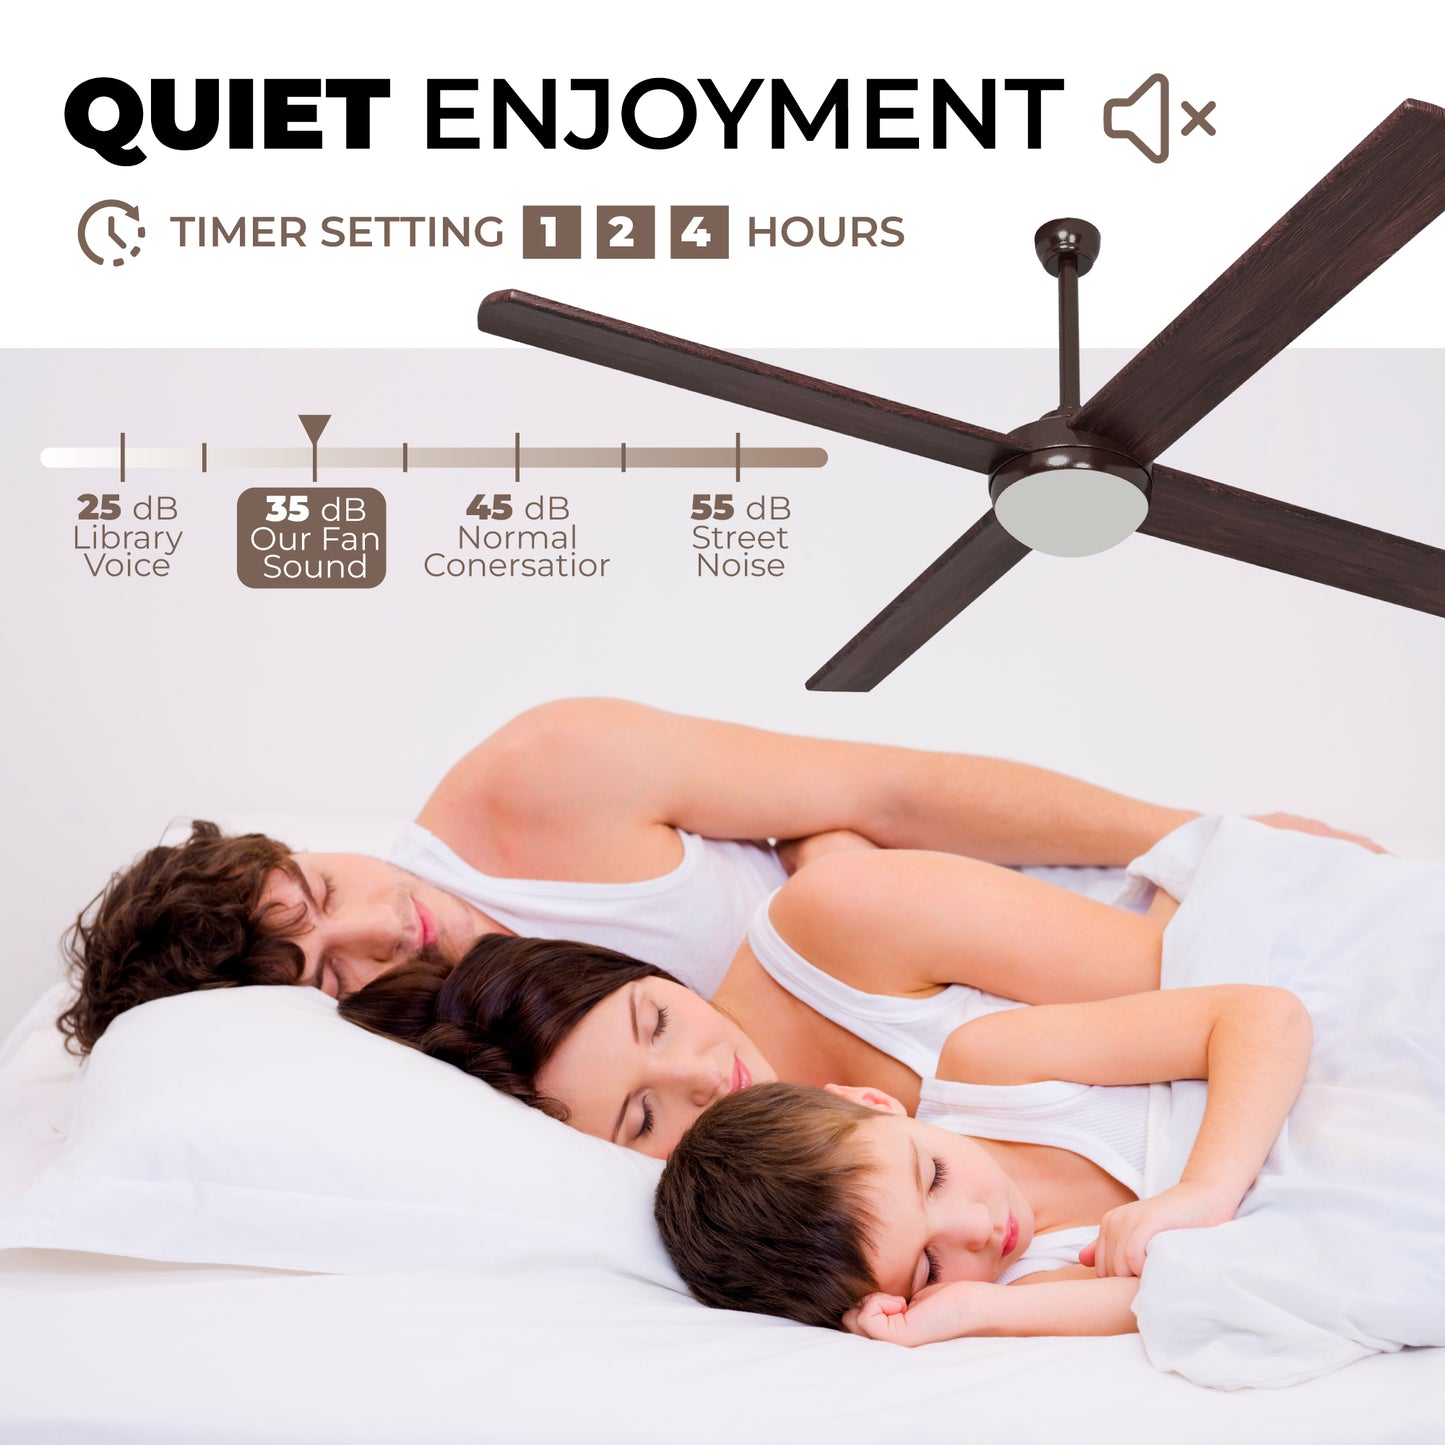 Remote Ceiling Fan with Light - 52 inch - 3 Color Options